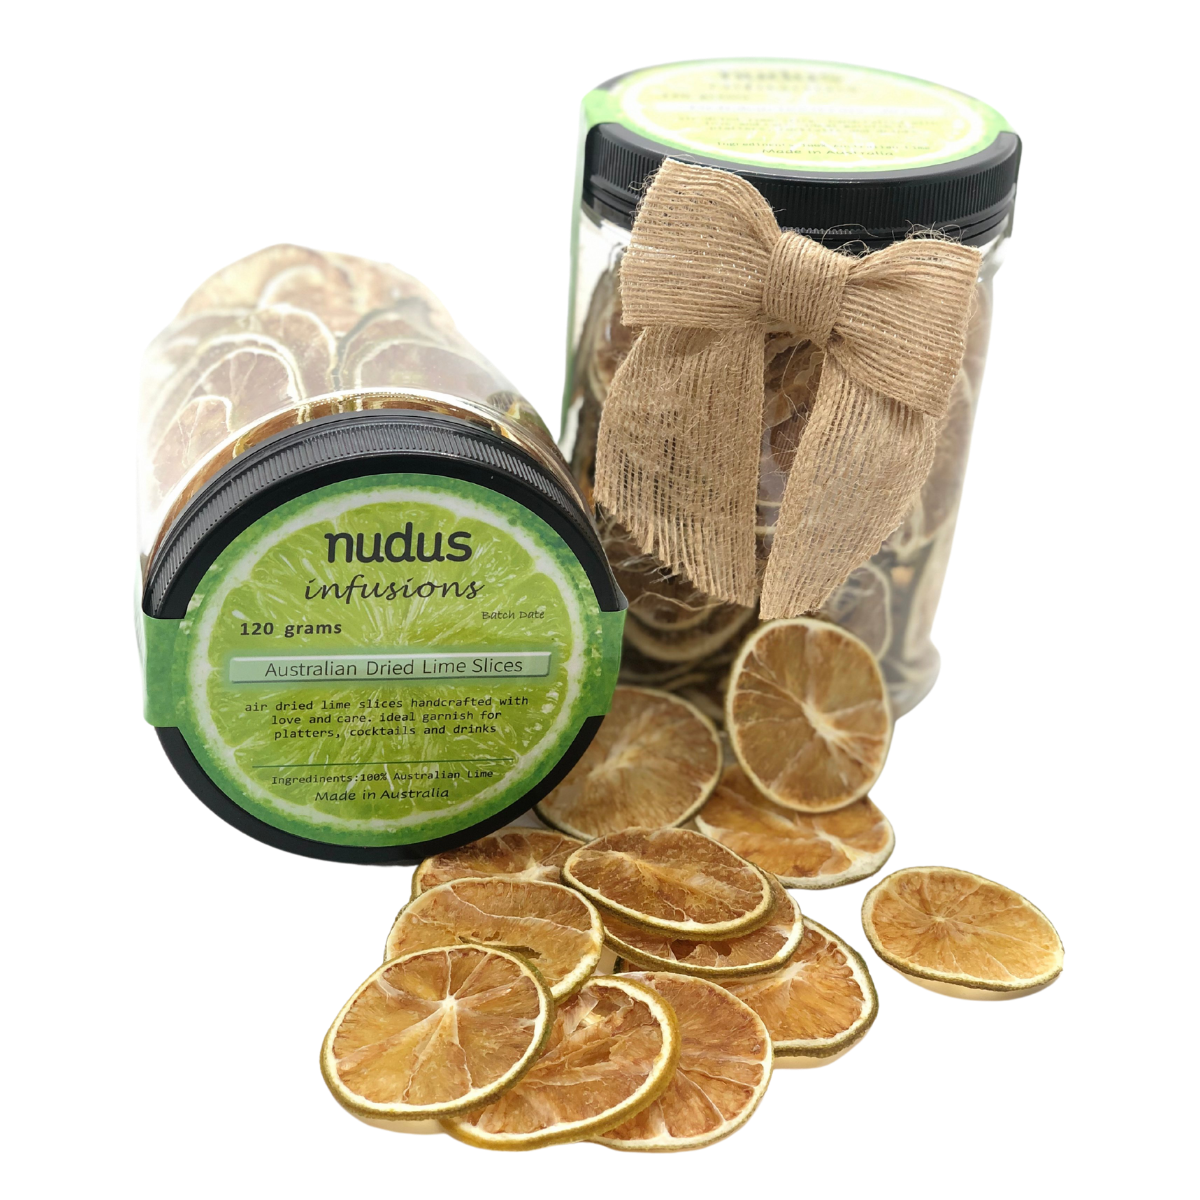 Our Favourites From Nudus Dried Infusions